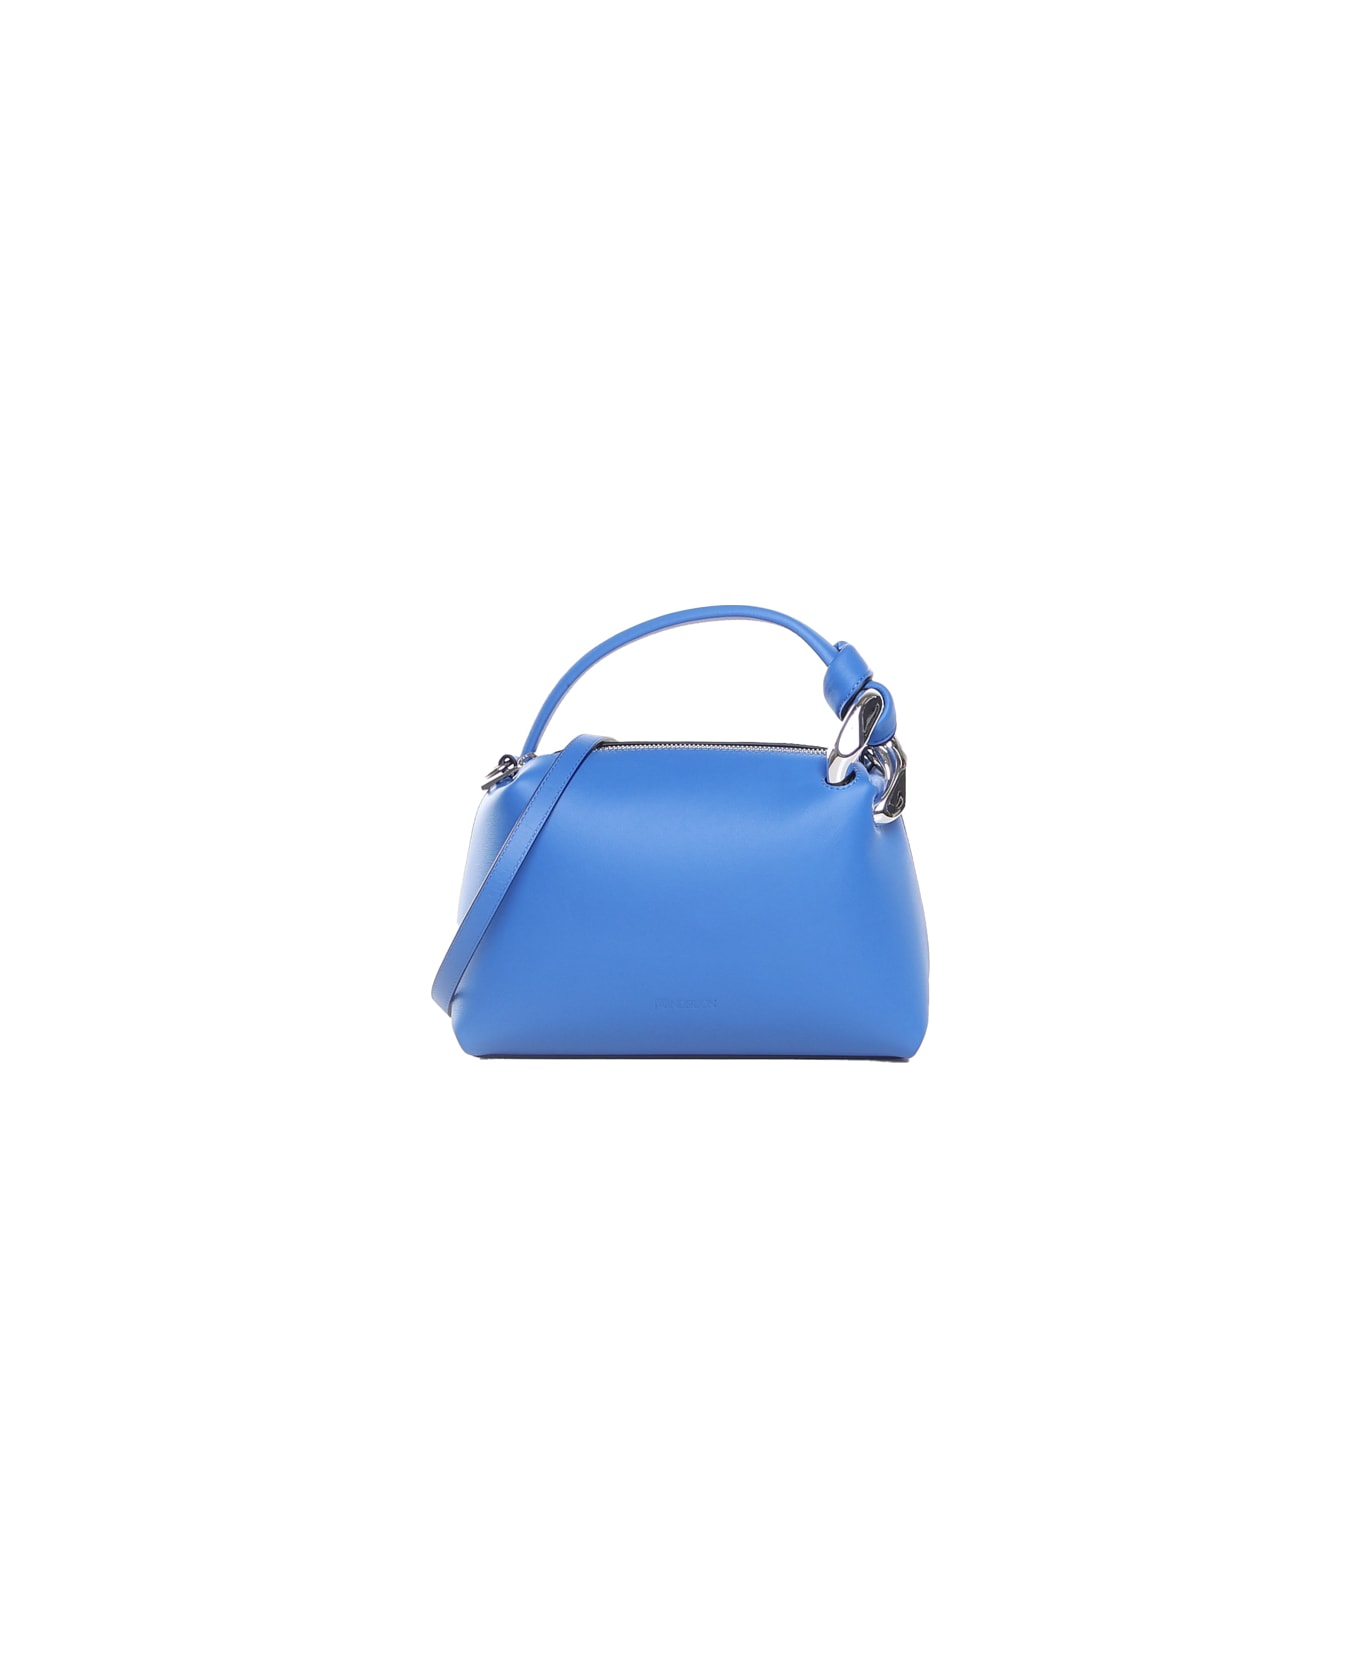 J.W. Anderson Small Corner Bag In Leather - SKY BLUE